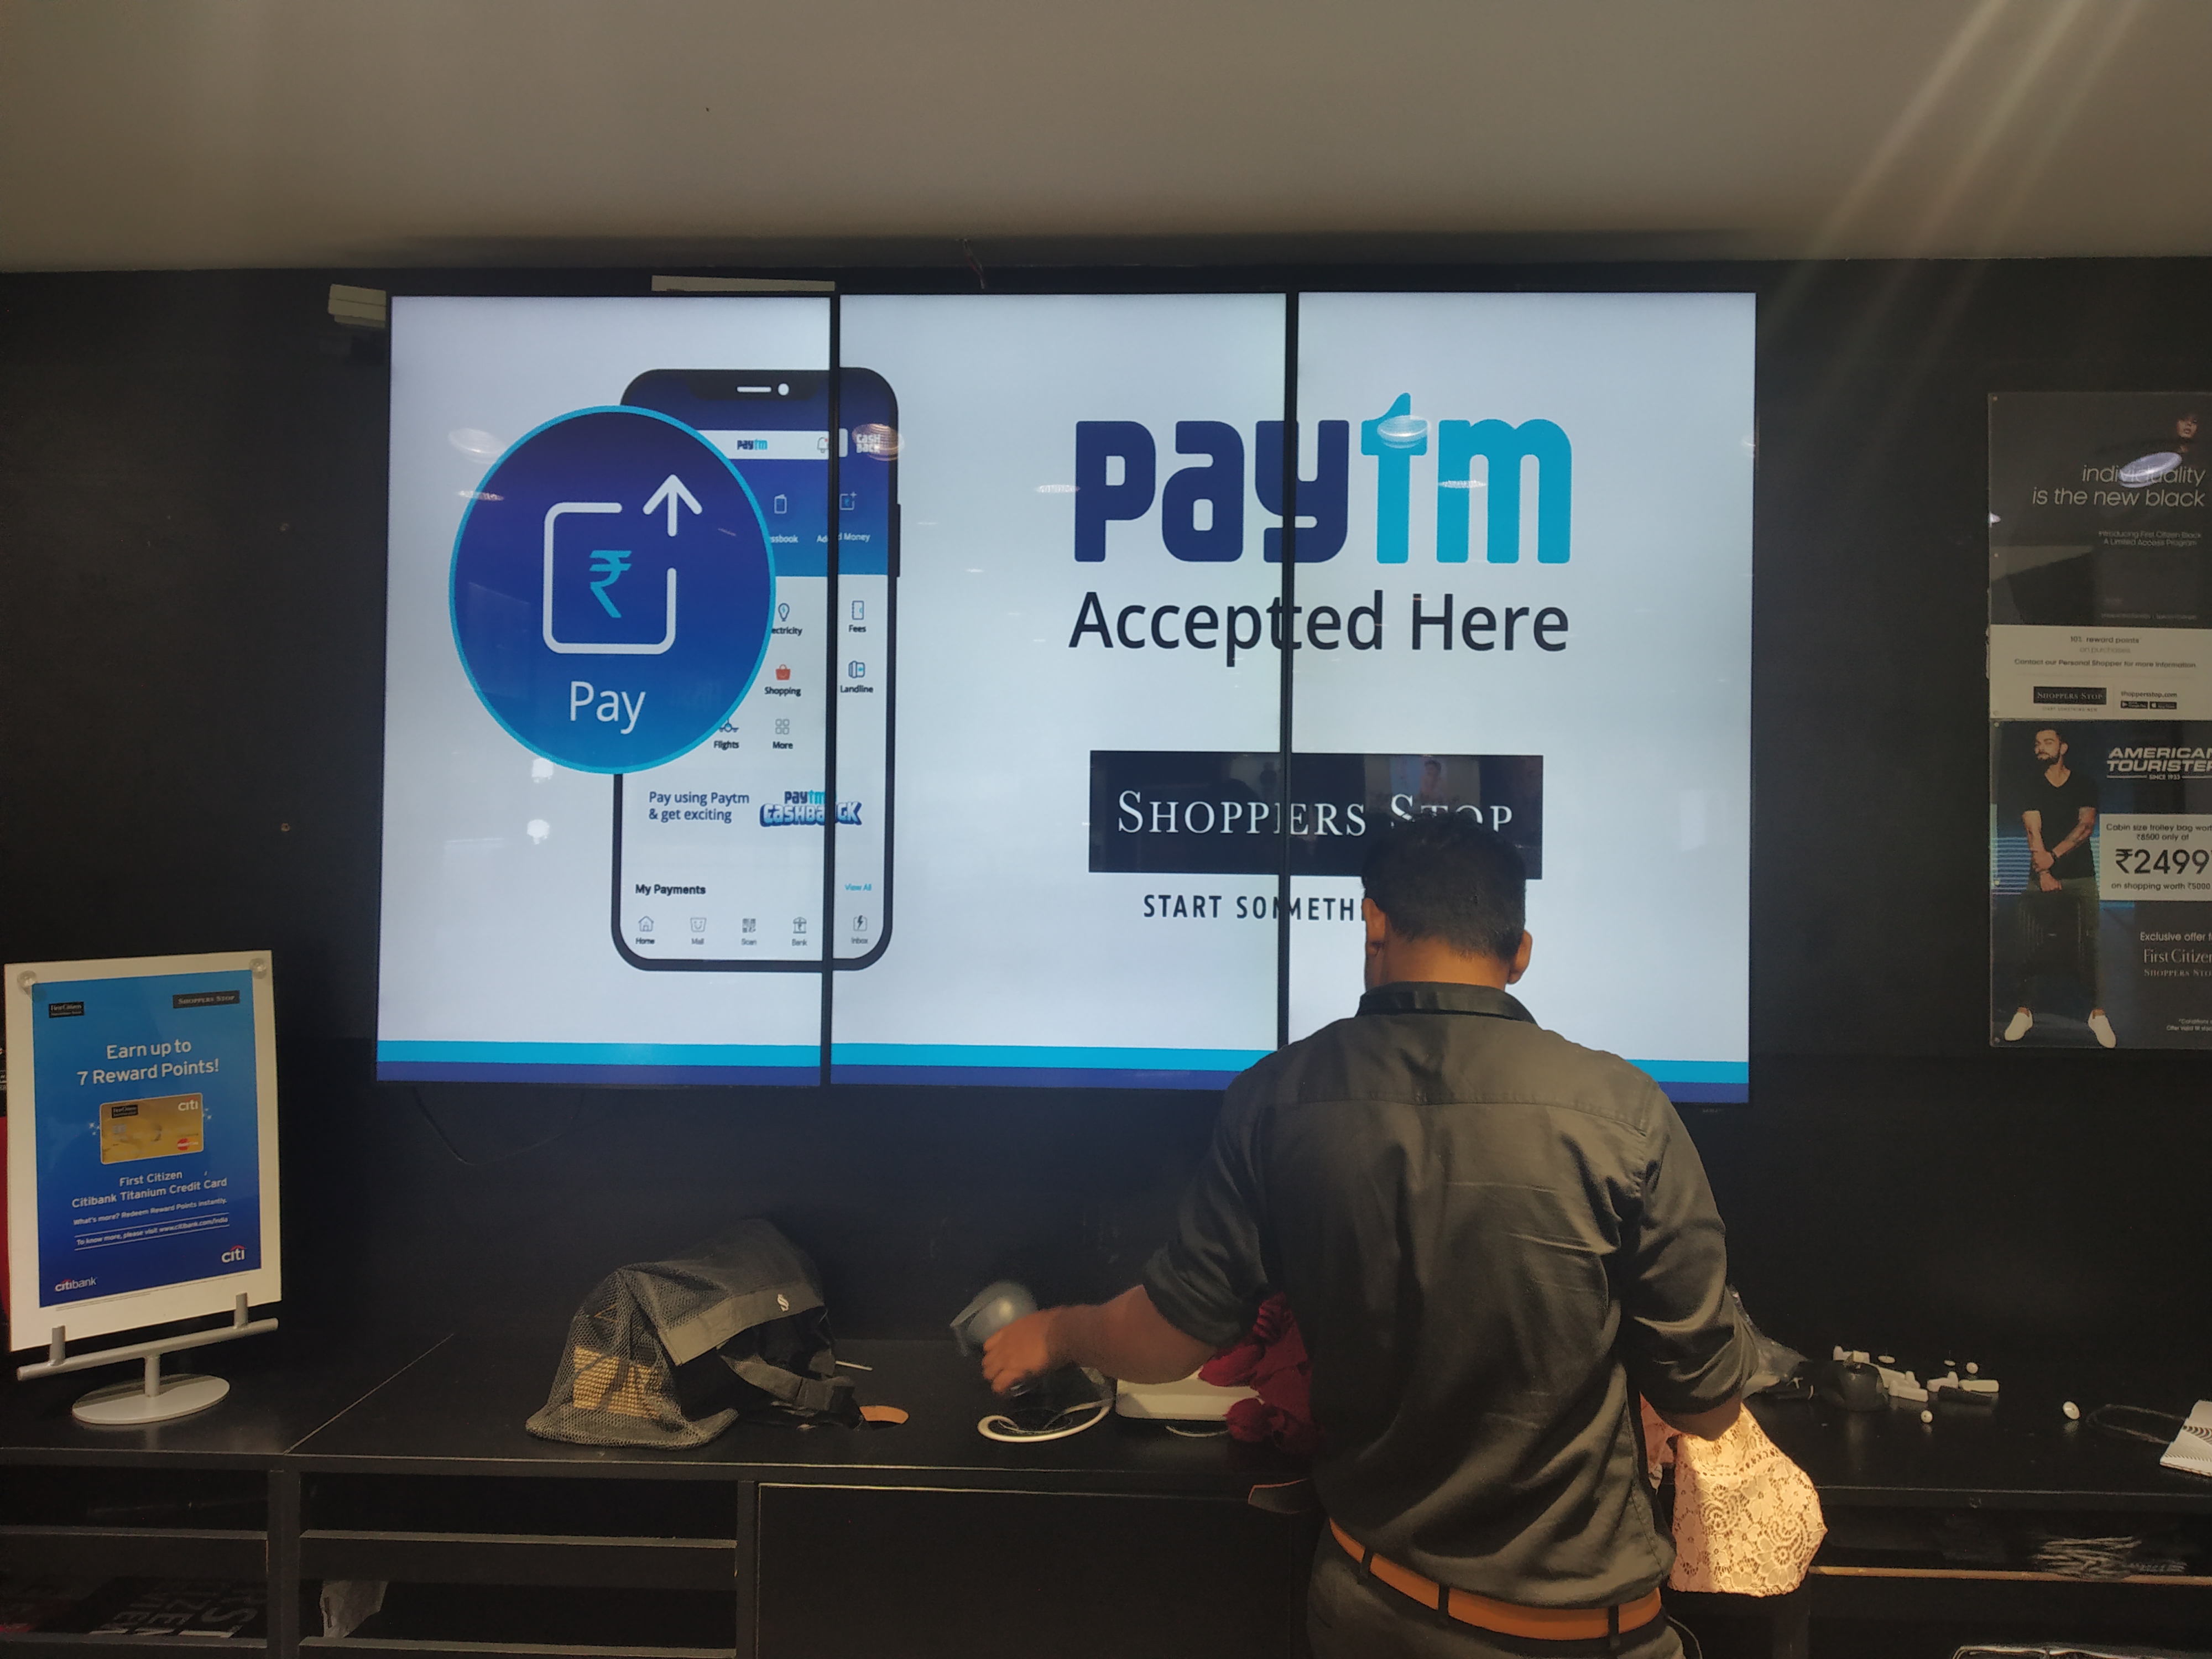 Alibaba-backed Paytm keeps USD 70 million in wallet to invest in AI startups